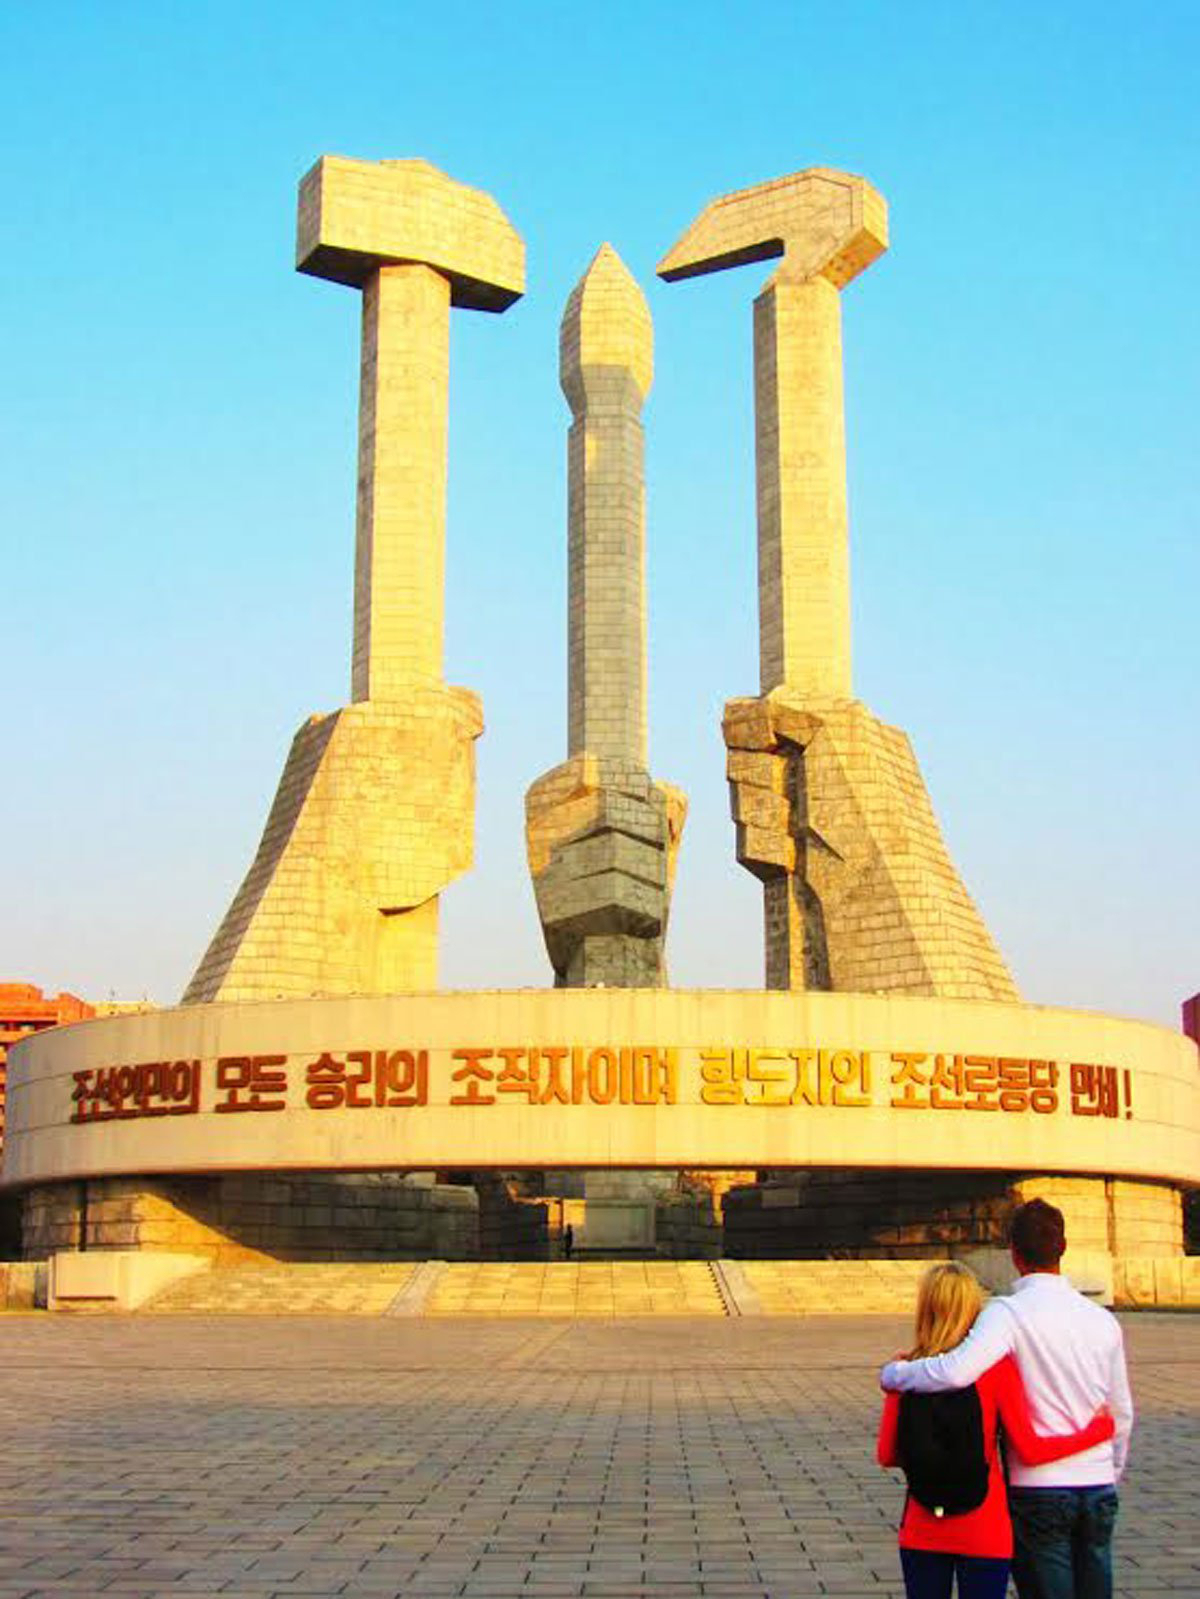 They also saw the massive Monument to the Party Founding that commemorates the creation of the Workers' Party of Korea in 1946.